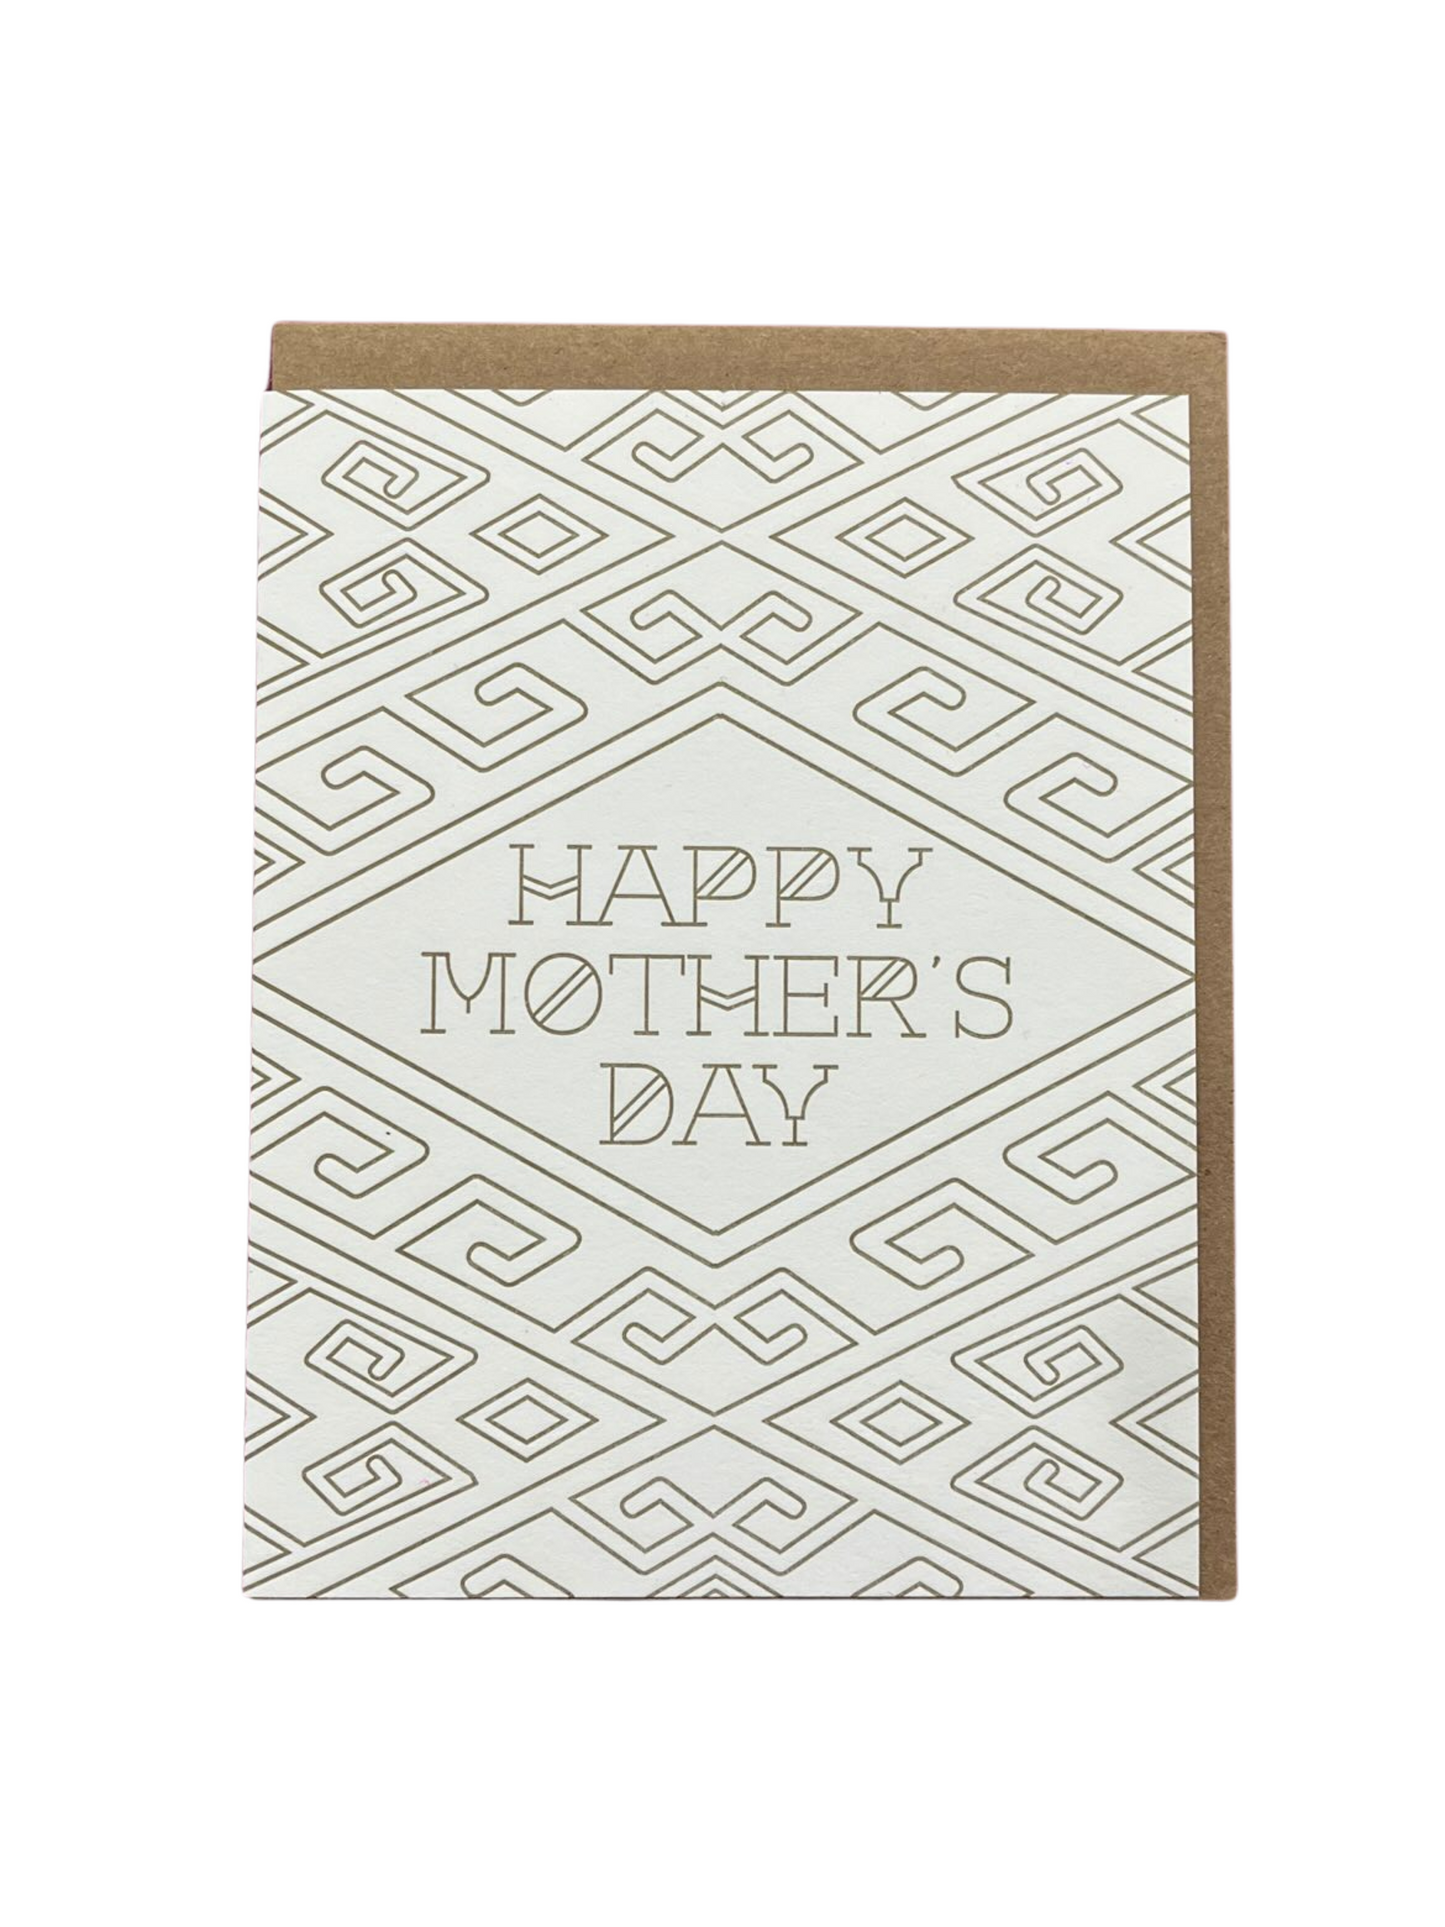 Mother's Day Pattern Card